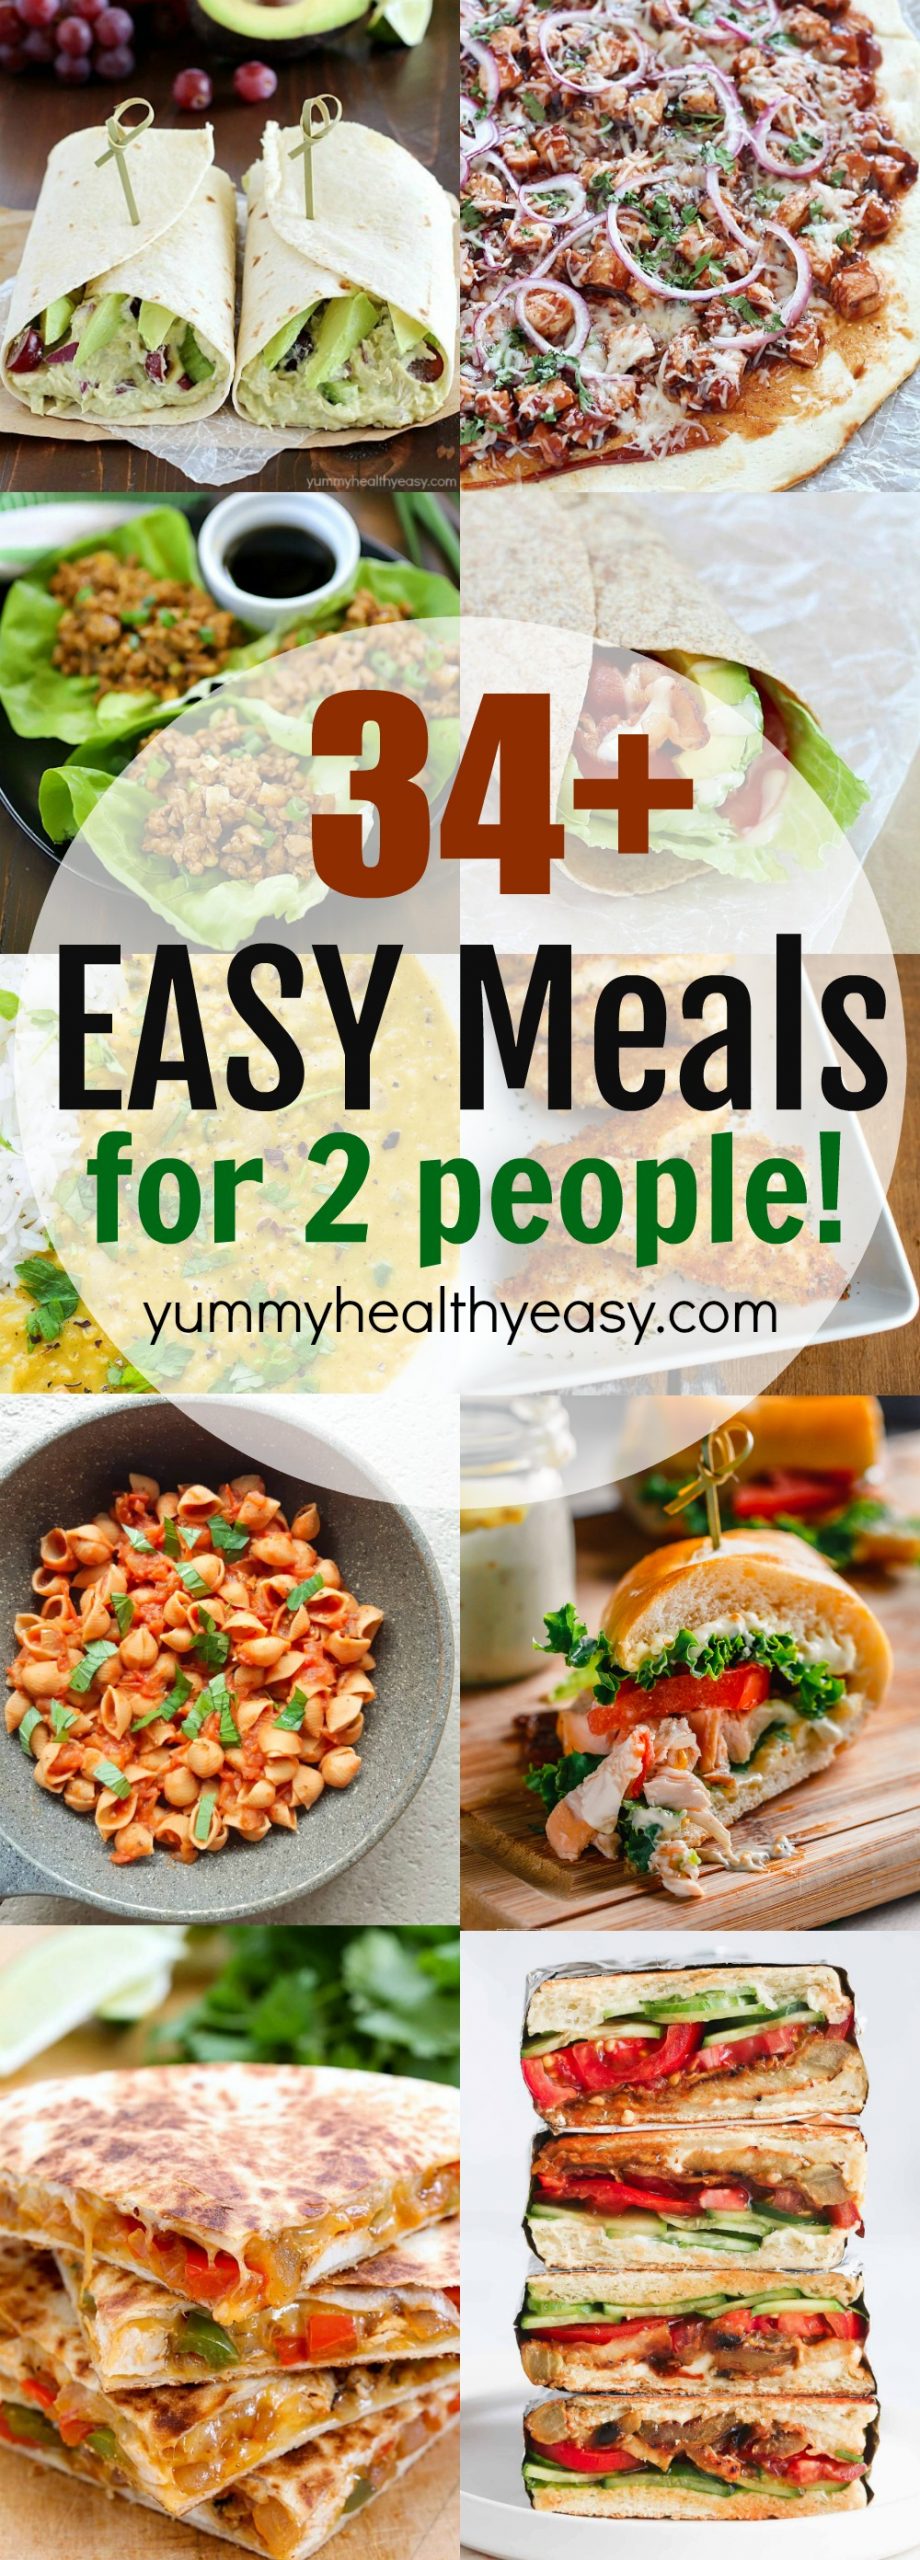 34 Easy Meals for Two People Collage